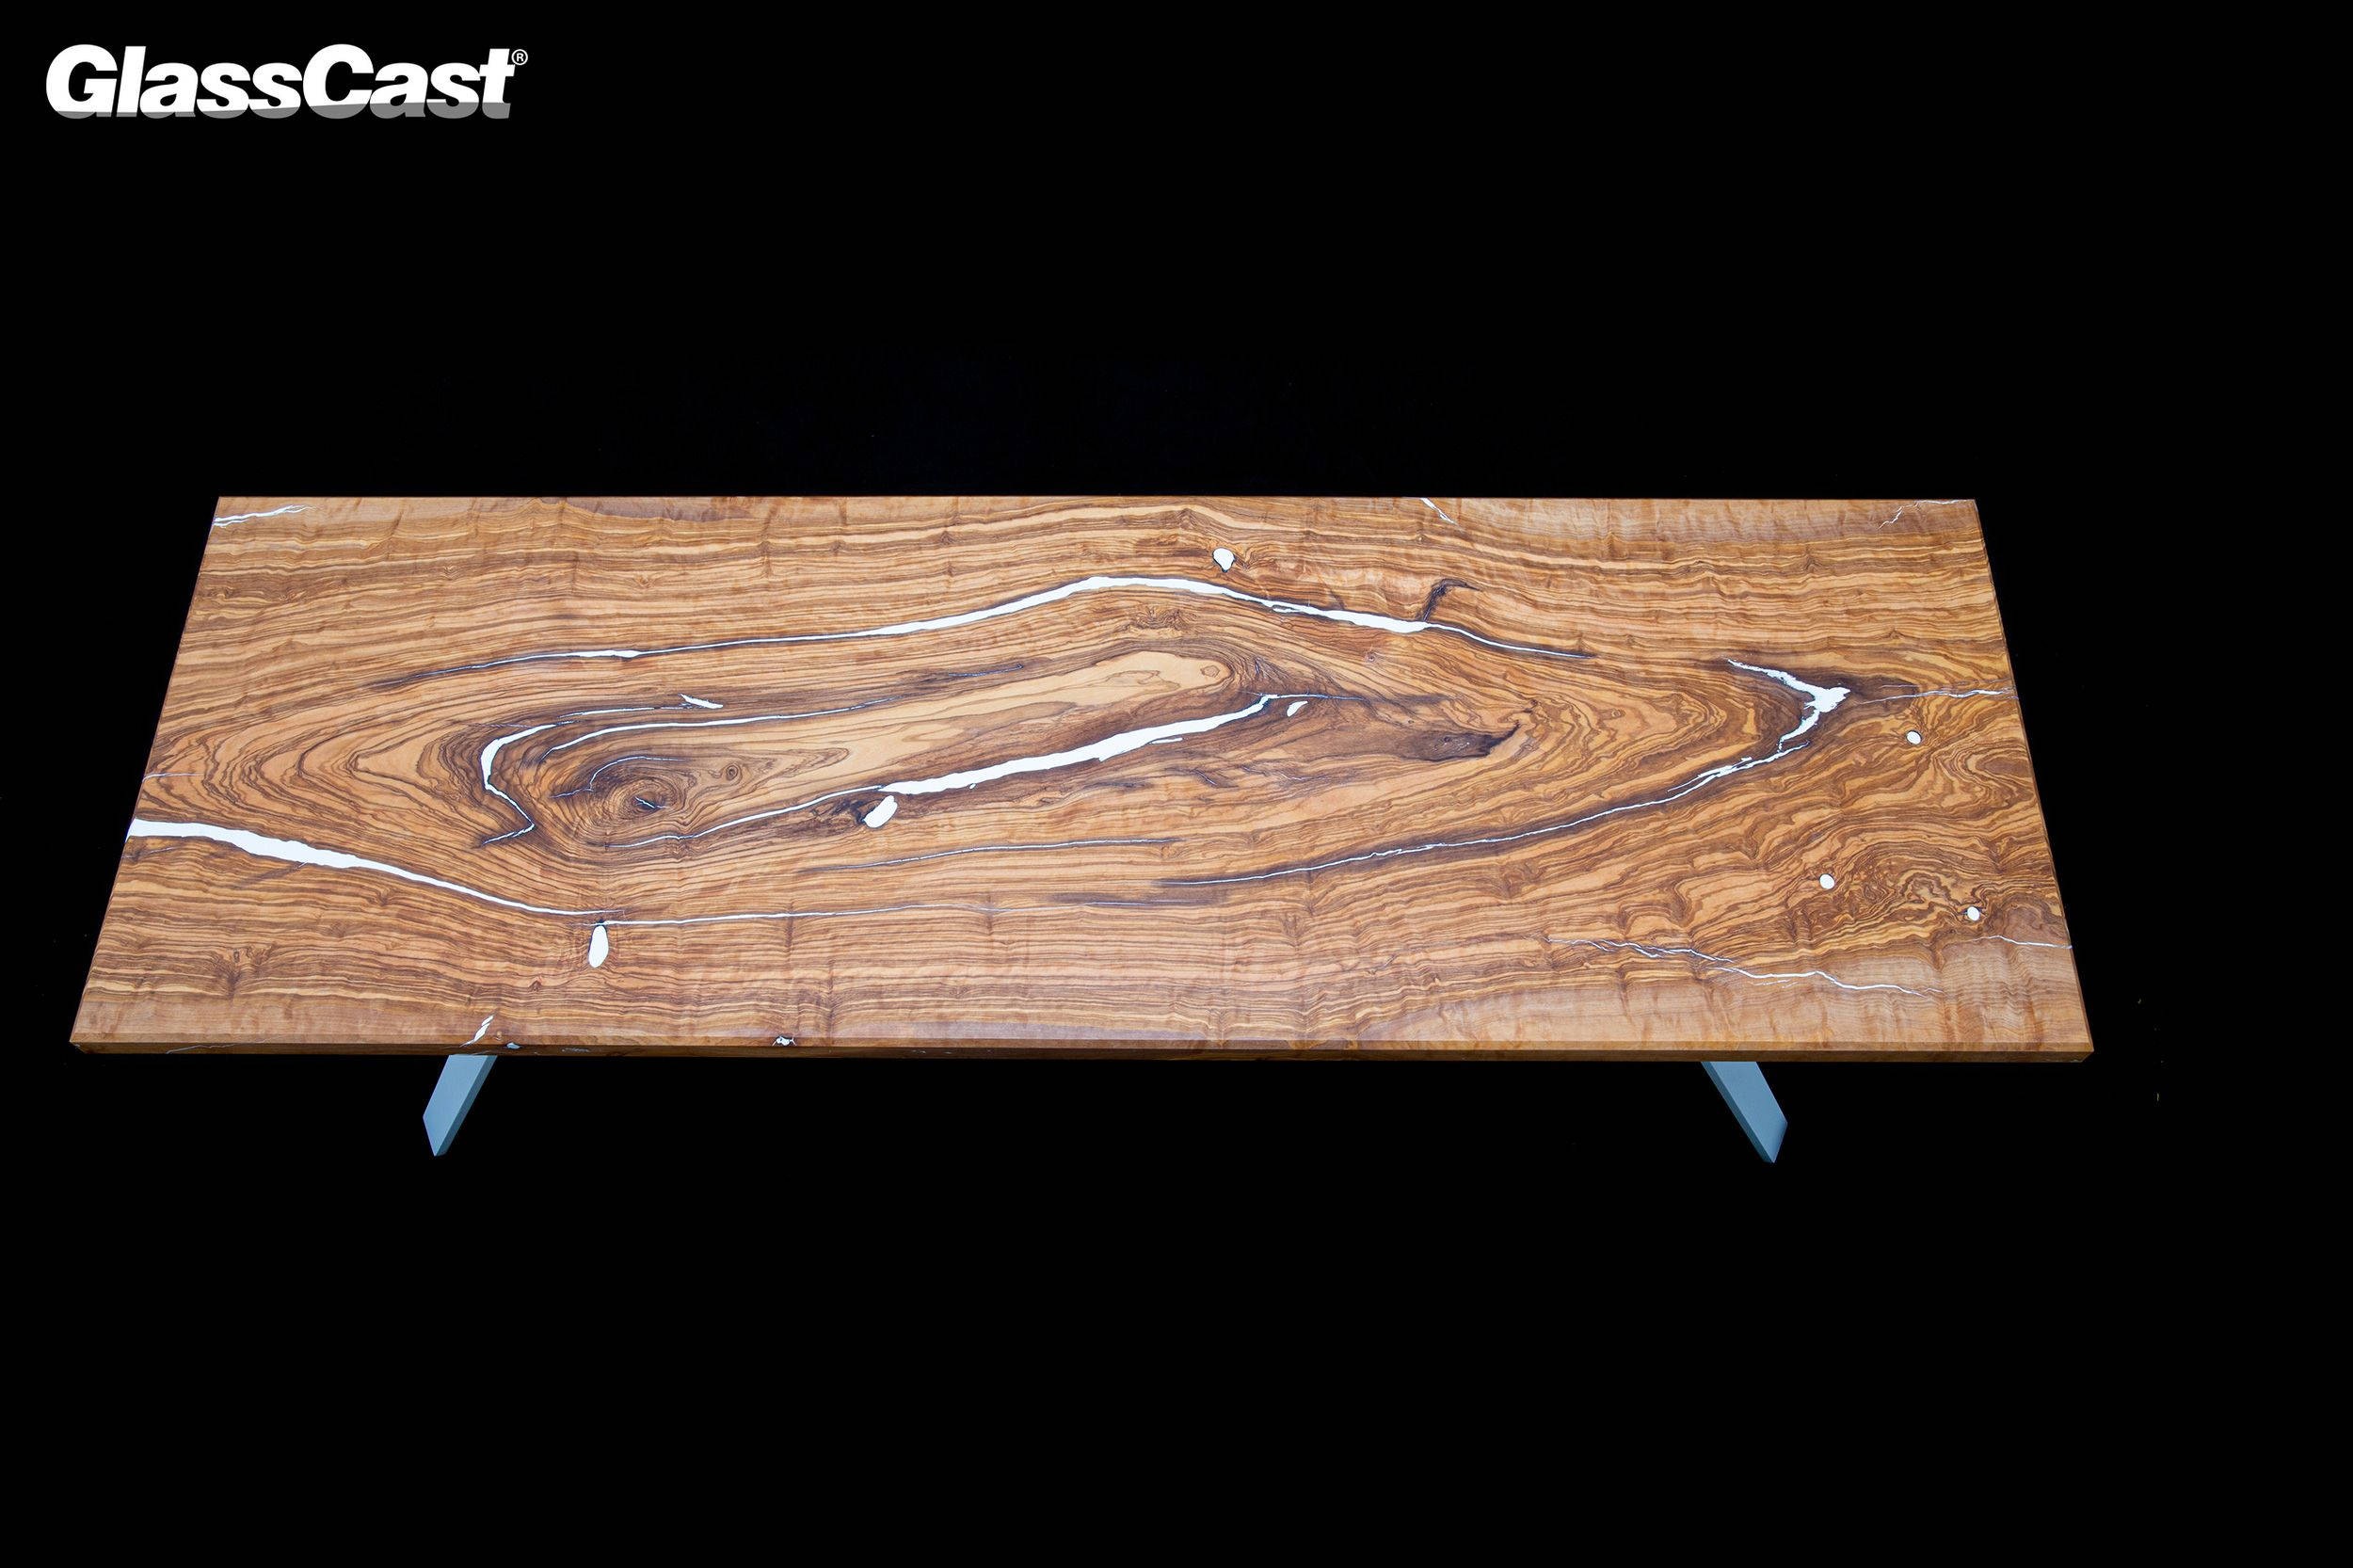 Wood and Resin Furniture - GlassCast